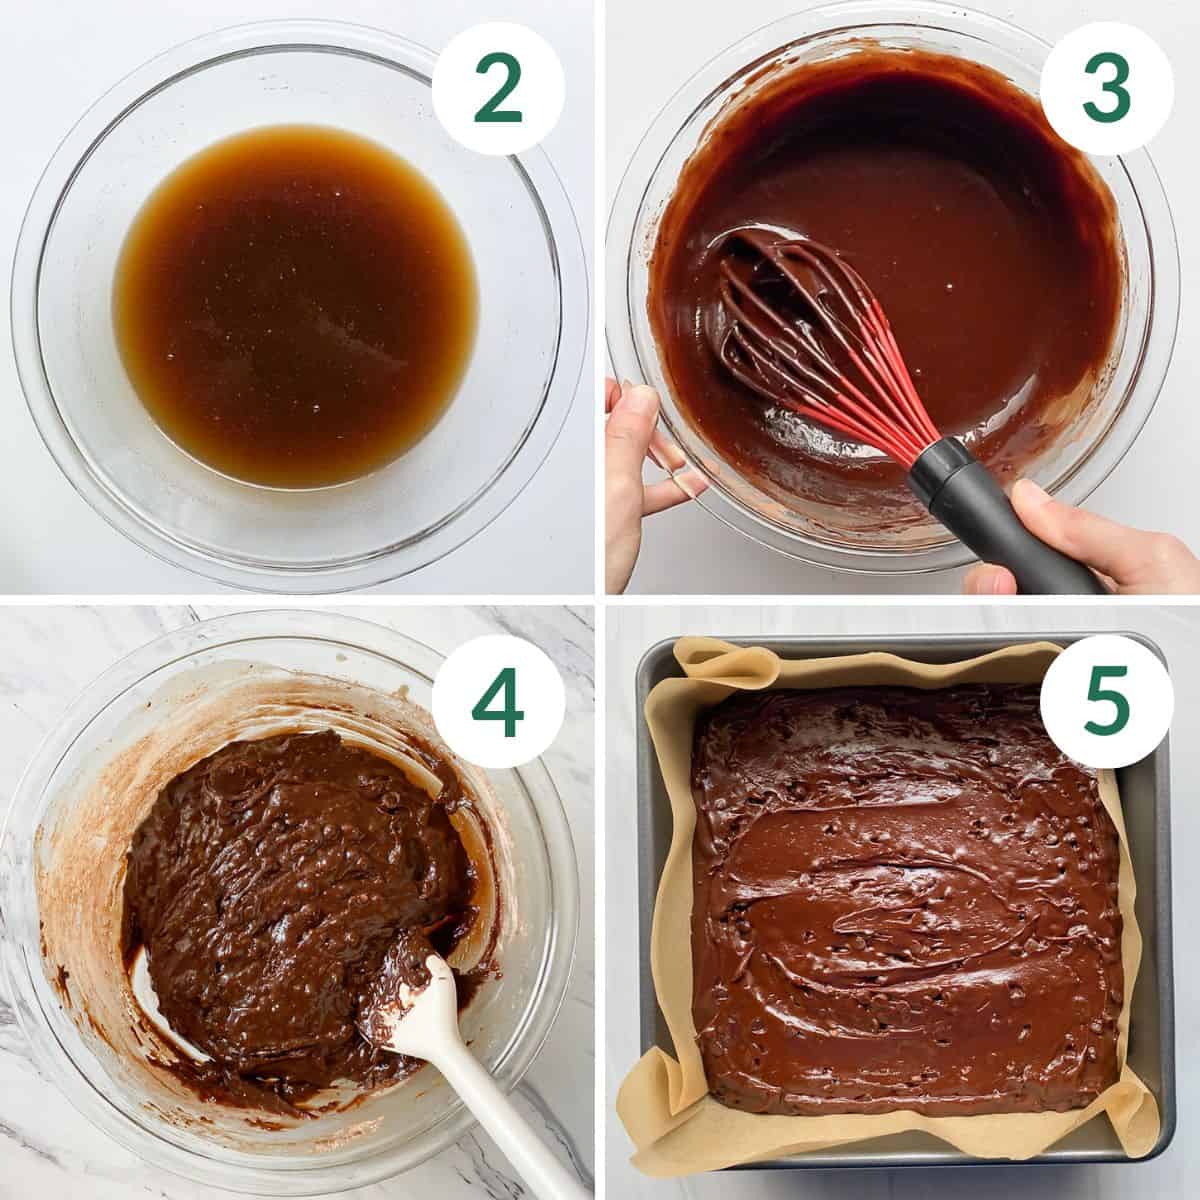 Steps 2-5 to make dairy-free brownies, including making a sugar syrup, melting the chocolate, making the final batter, and preparing to bake.